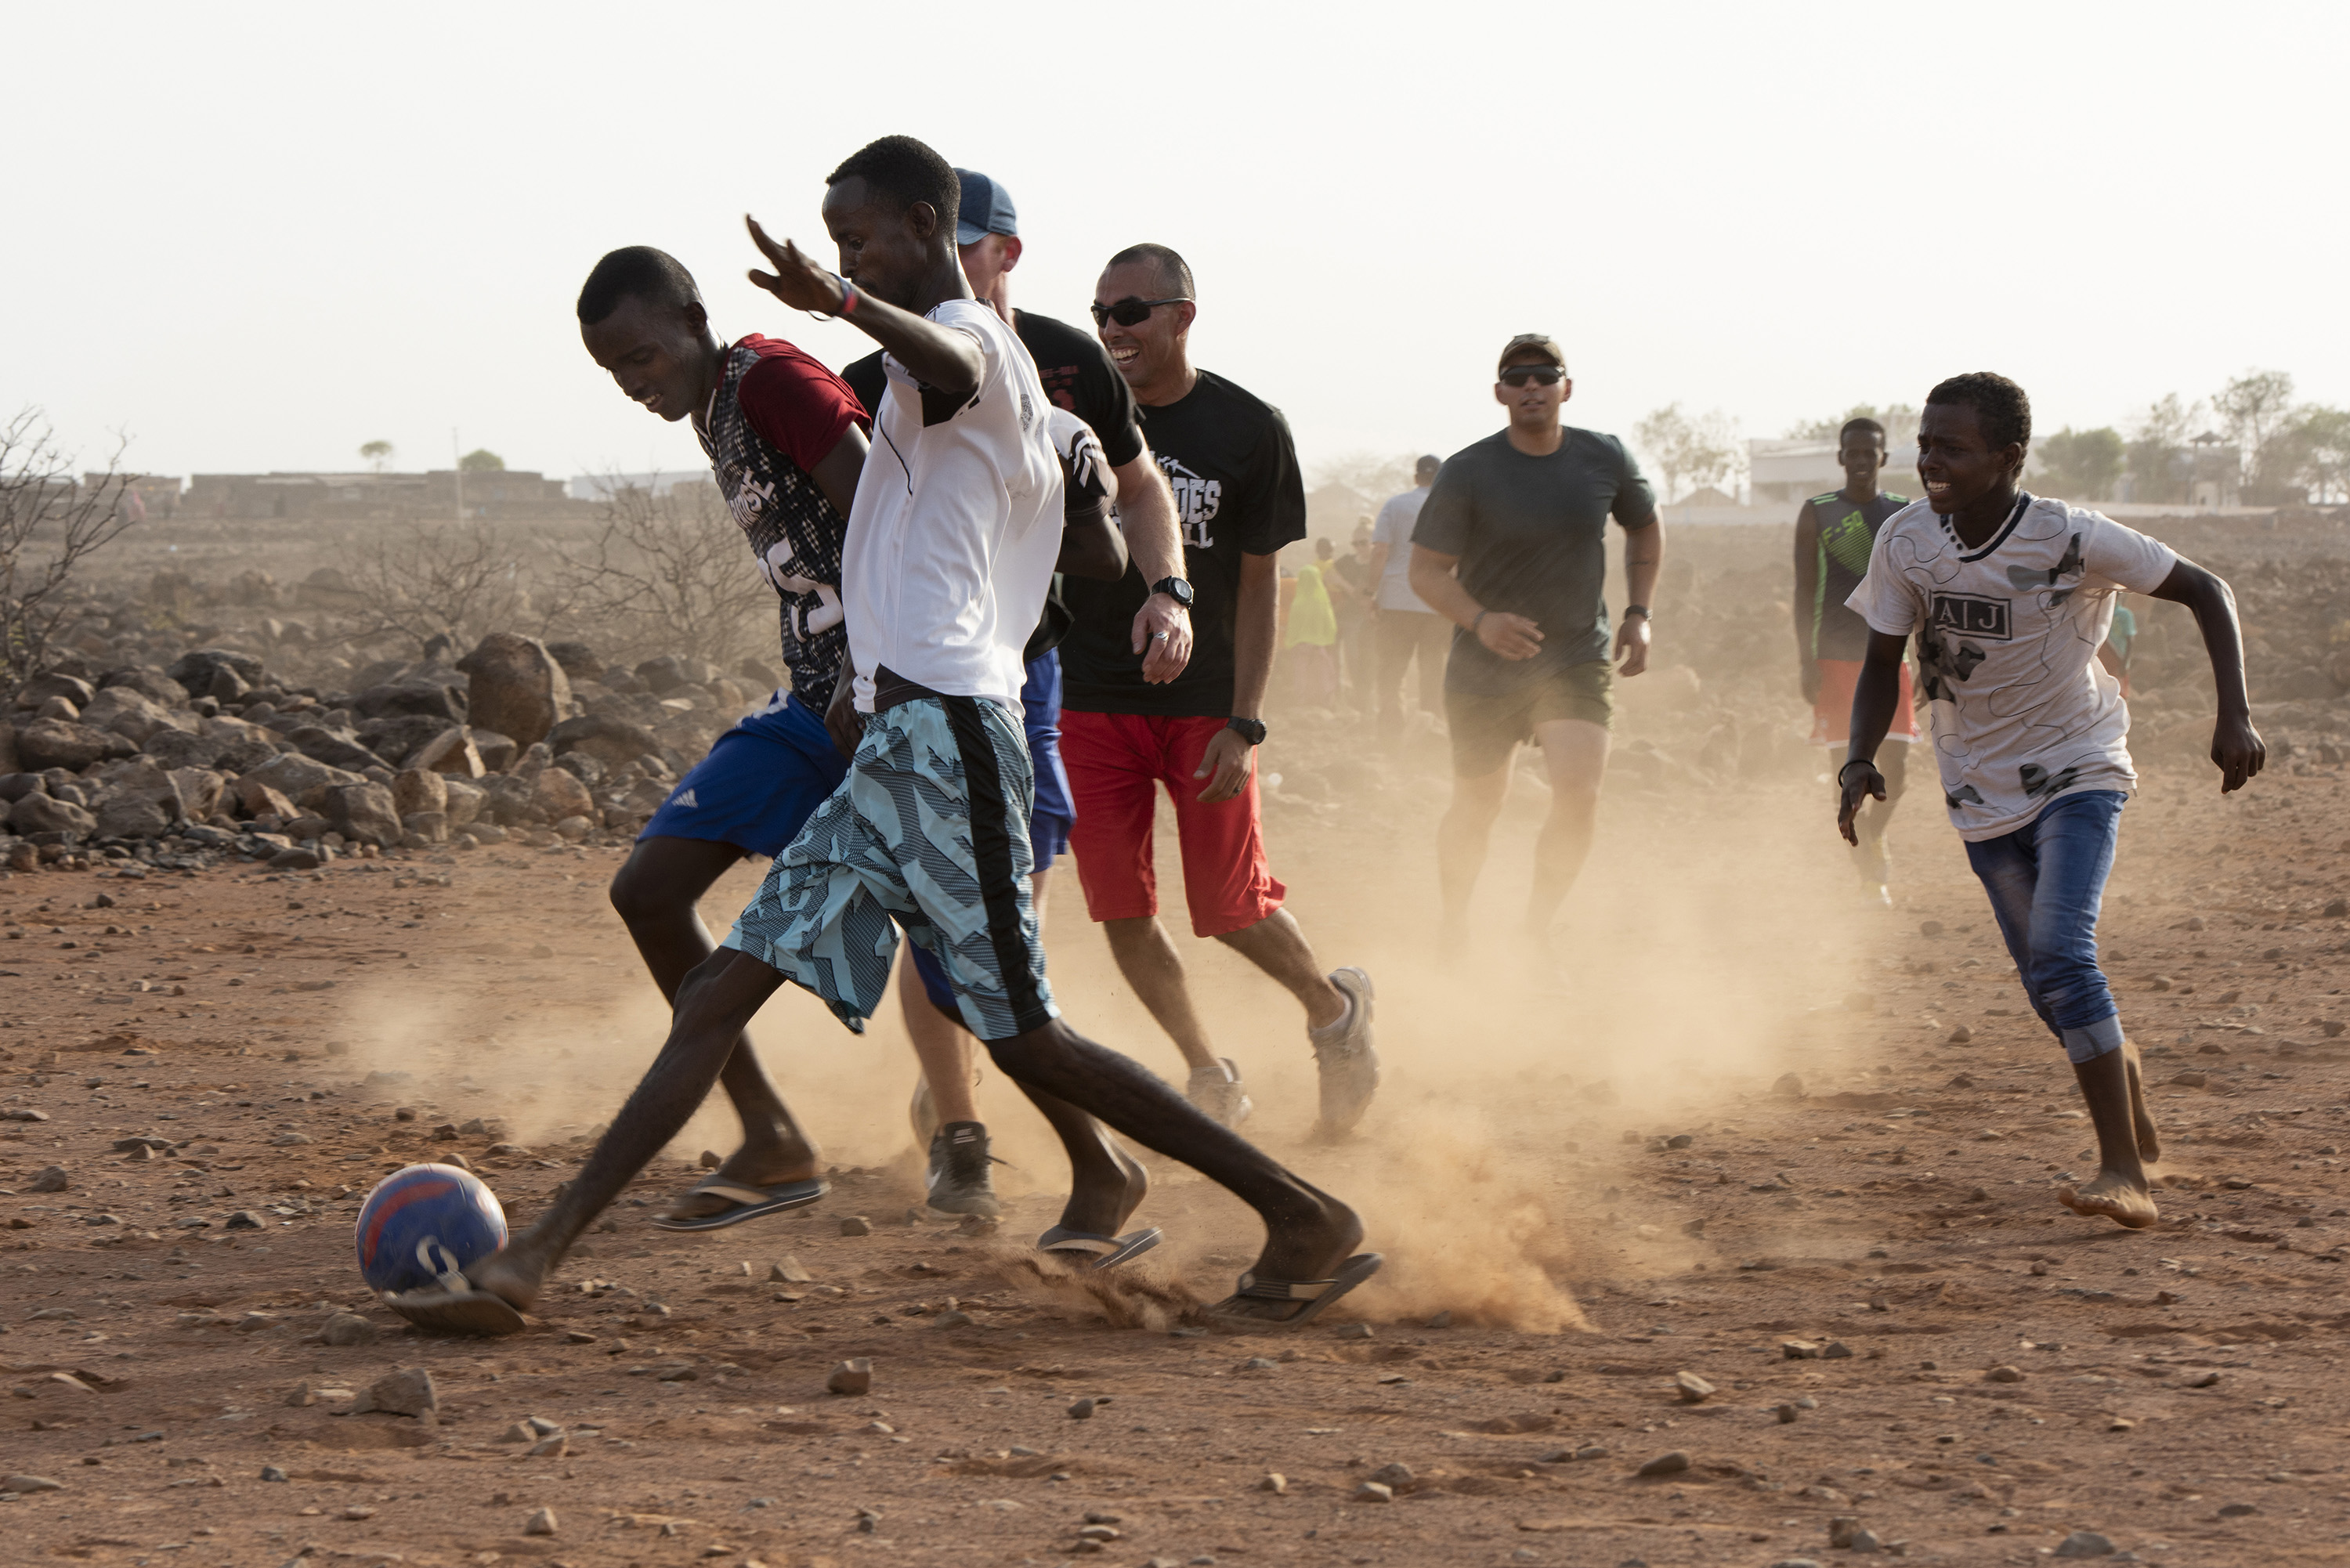 U.S. Service members assigned to Combined Joint Task Force - Horn of Africa participate in a friendly game of soccer with children from the nearby village, outside of Chebelley village, Djibouti, Aug. 3, 2018. Over 30 Soldiers and Airmen volunteered for the outreach event organized by the 404th Civil Affairs Battalion. (U.S. Air National Guard photo by Master Sgt. Sarah Mattison)